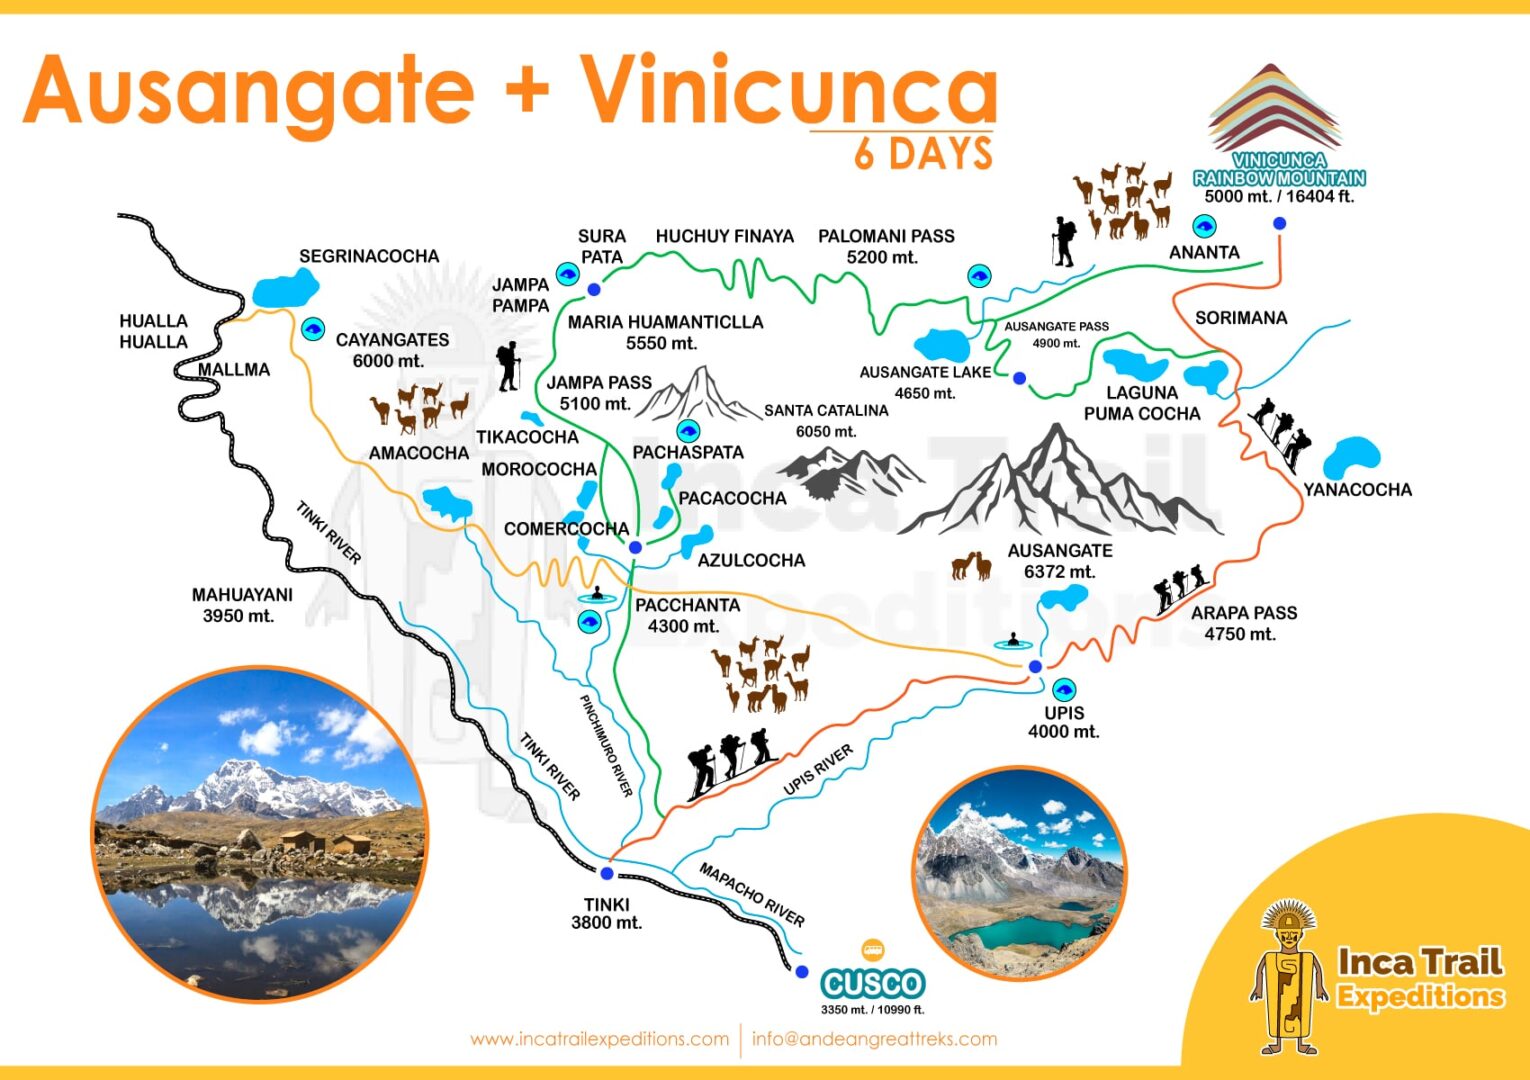 AUSANGATE-VINICUNCA-6-DAYS-BY-INCA-TRAIL-EXPEDITIONS